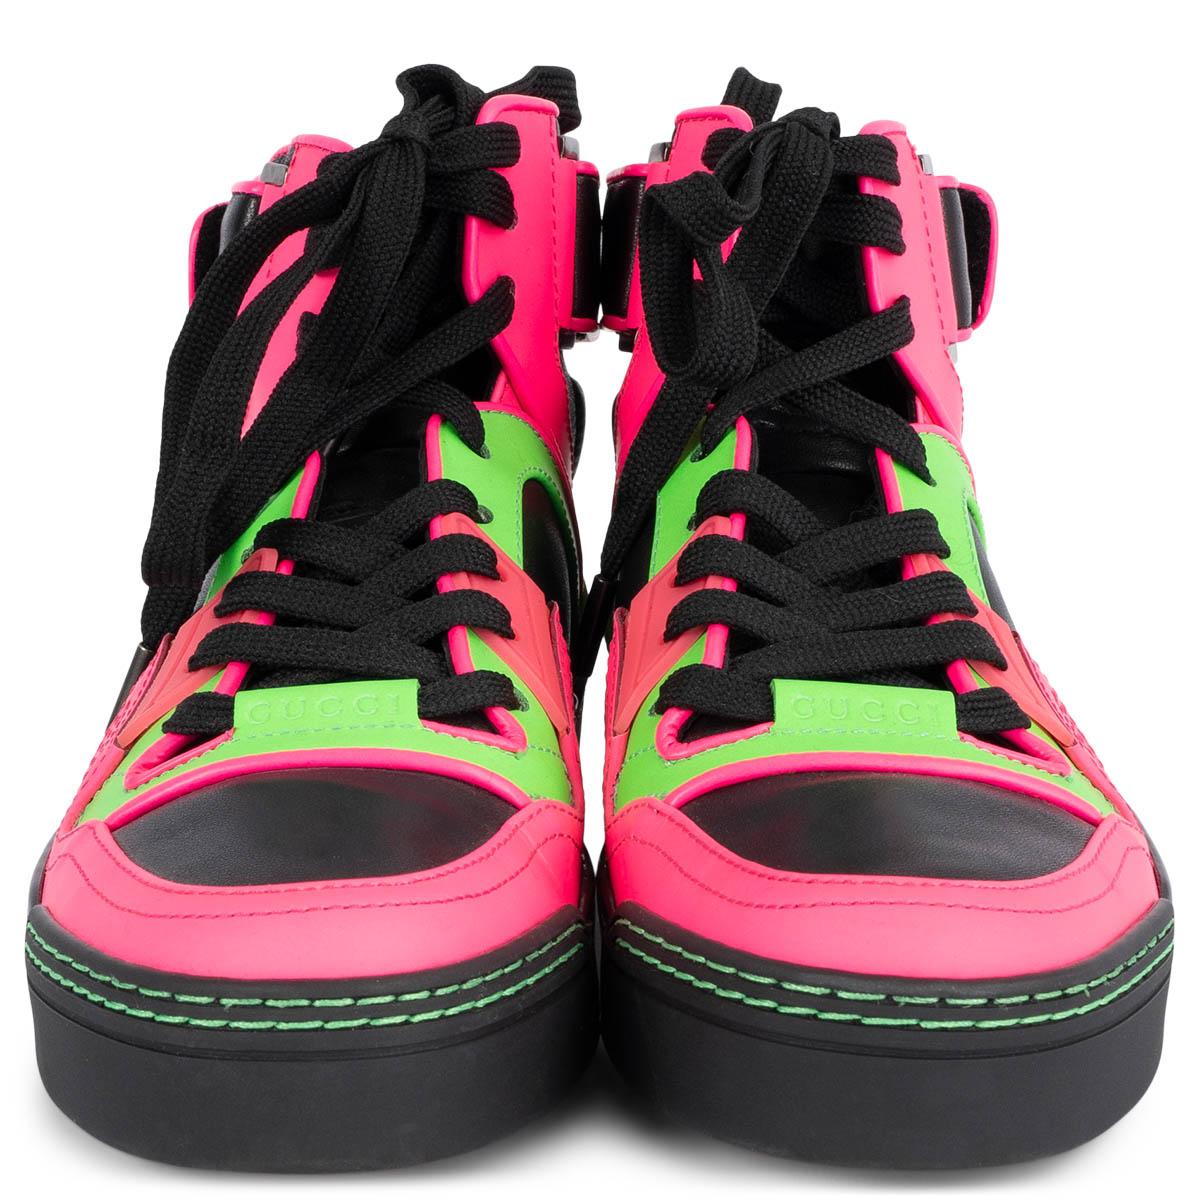 100% authentic Gucci 'New Basketball' high-top sneakers in black leather with neon pink adn green trims. Feature a lace-up front and logo velcrow tab in the back. Have been worn and are in excellent condition.

Measurements
Imprinted Size	35.5
Shoe